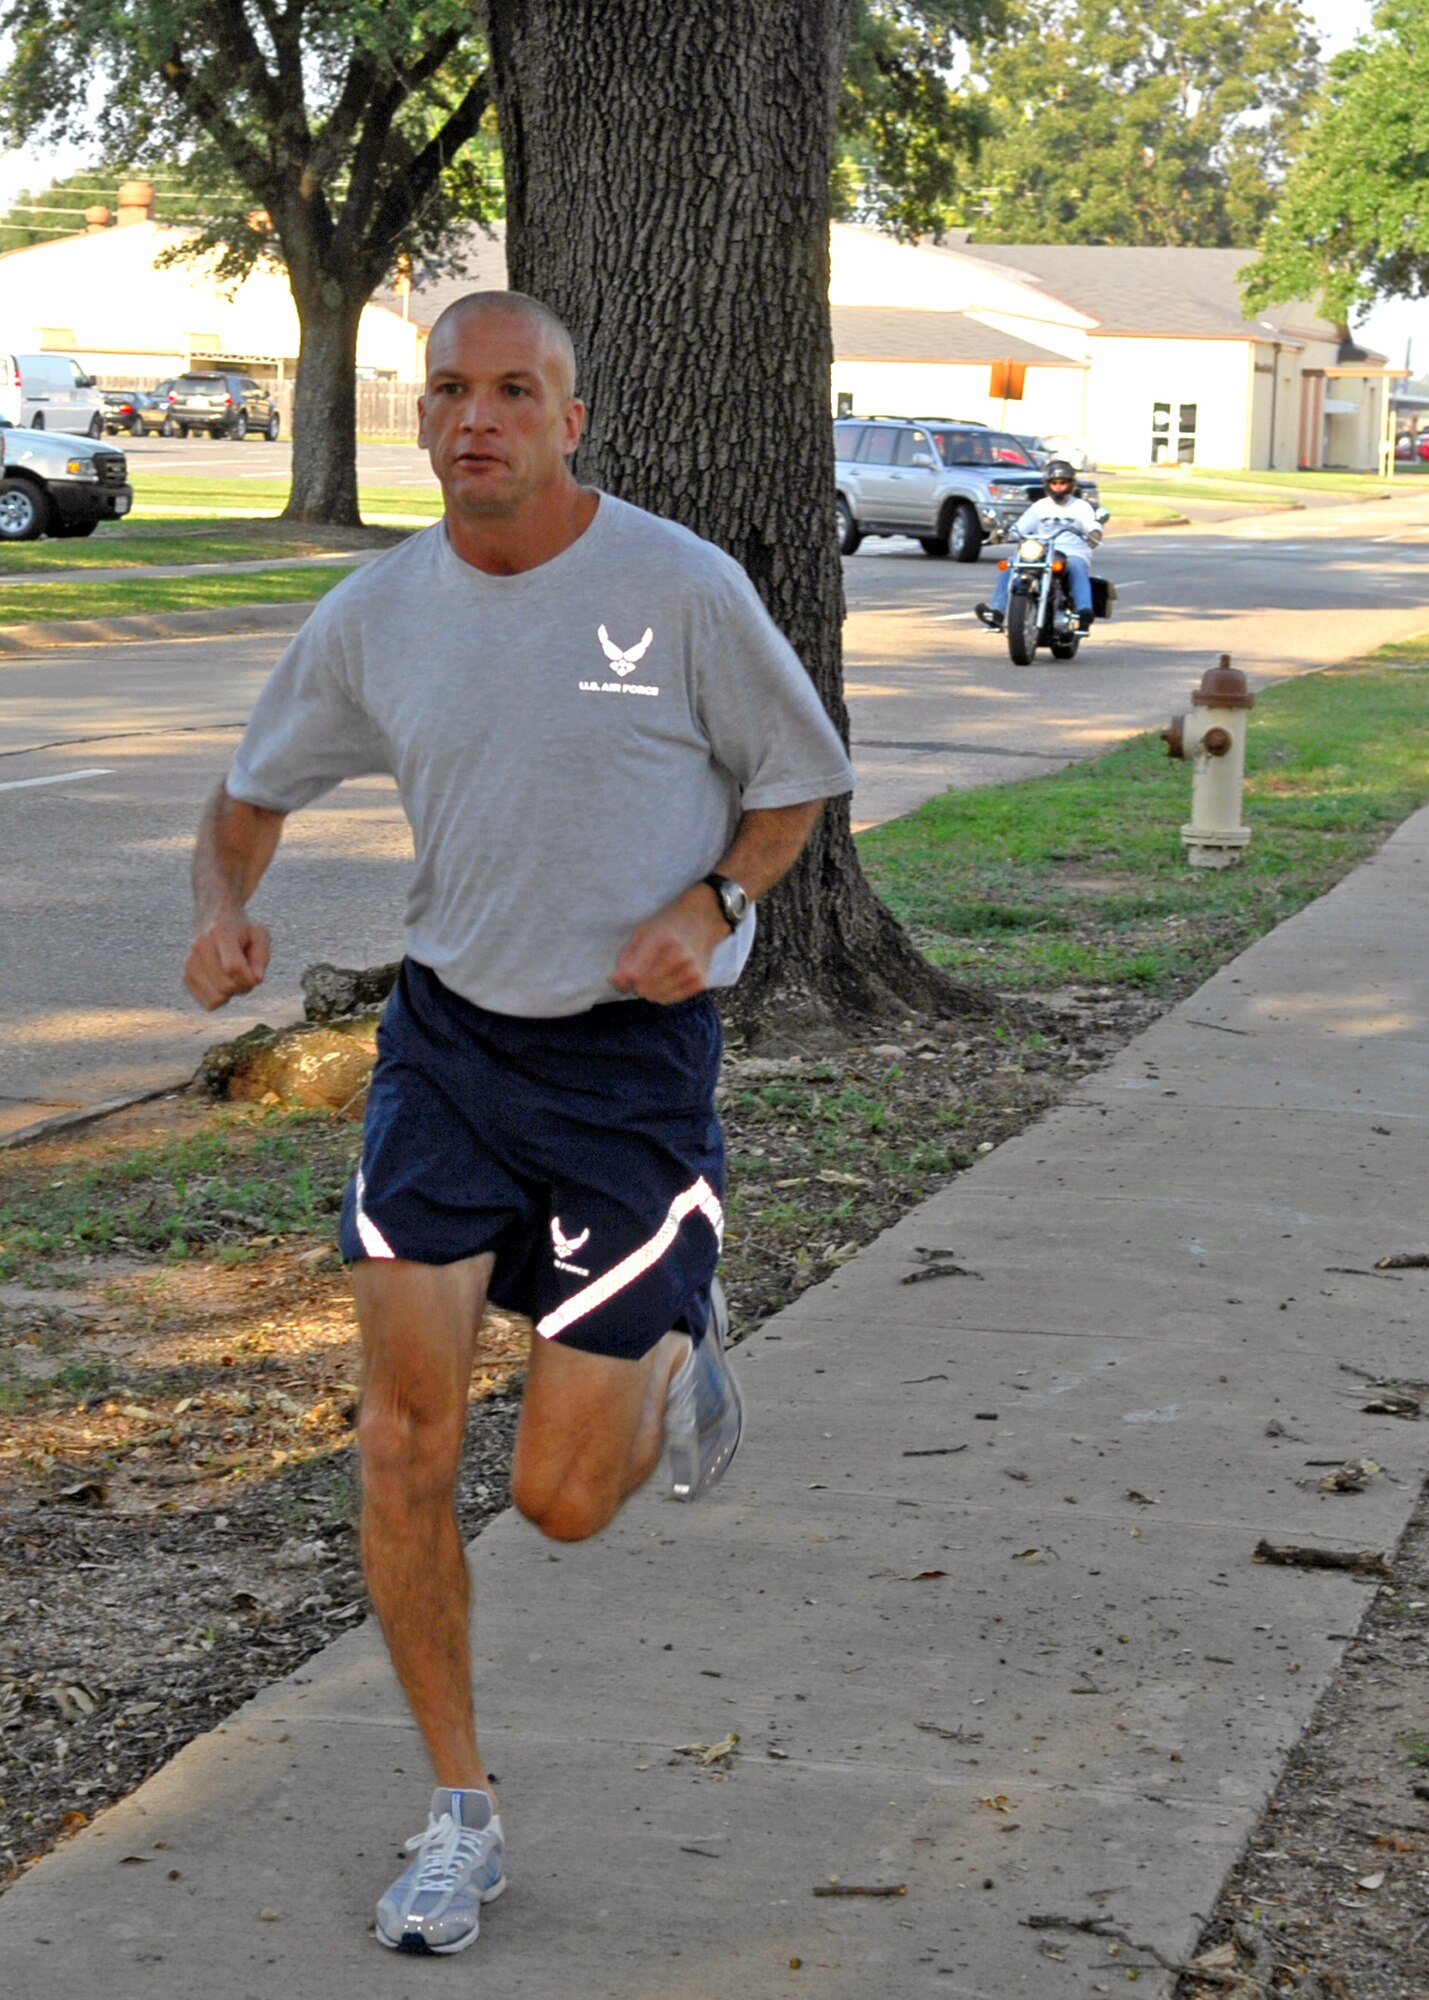 Chief Cooley finished 12th out of 515 military men with a time of 3:12:44 during the 12th annual Air Force Marathon. (U.S. Air Force photo by Staff Sgt. Trina Jeanjacques)
